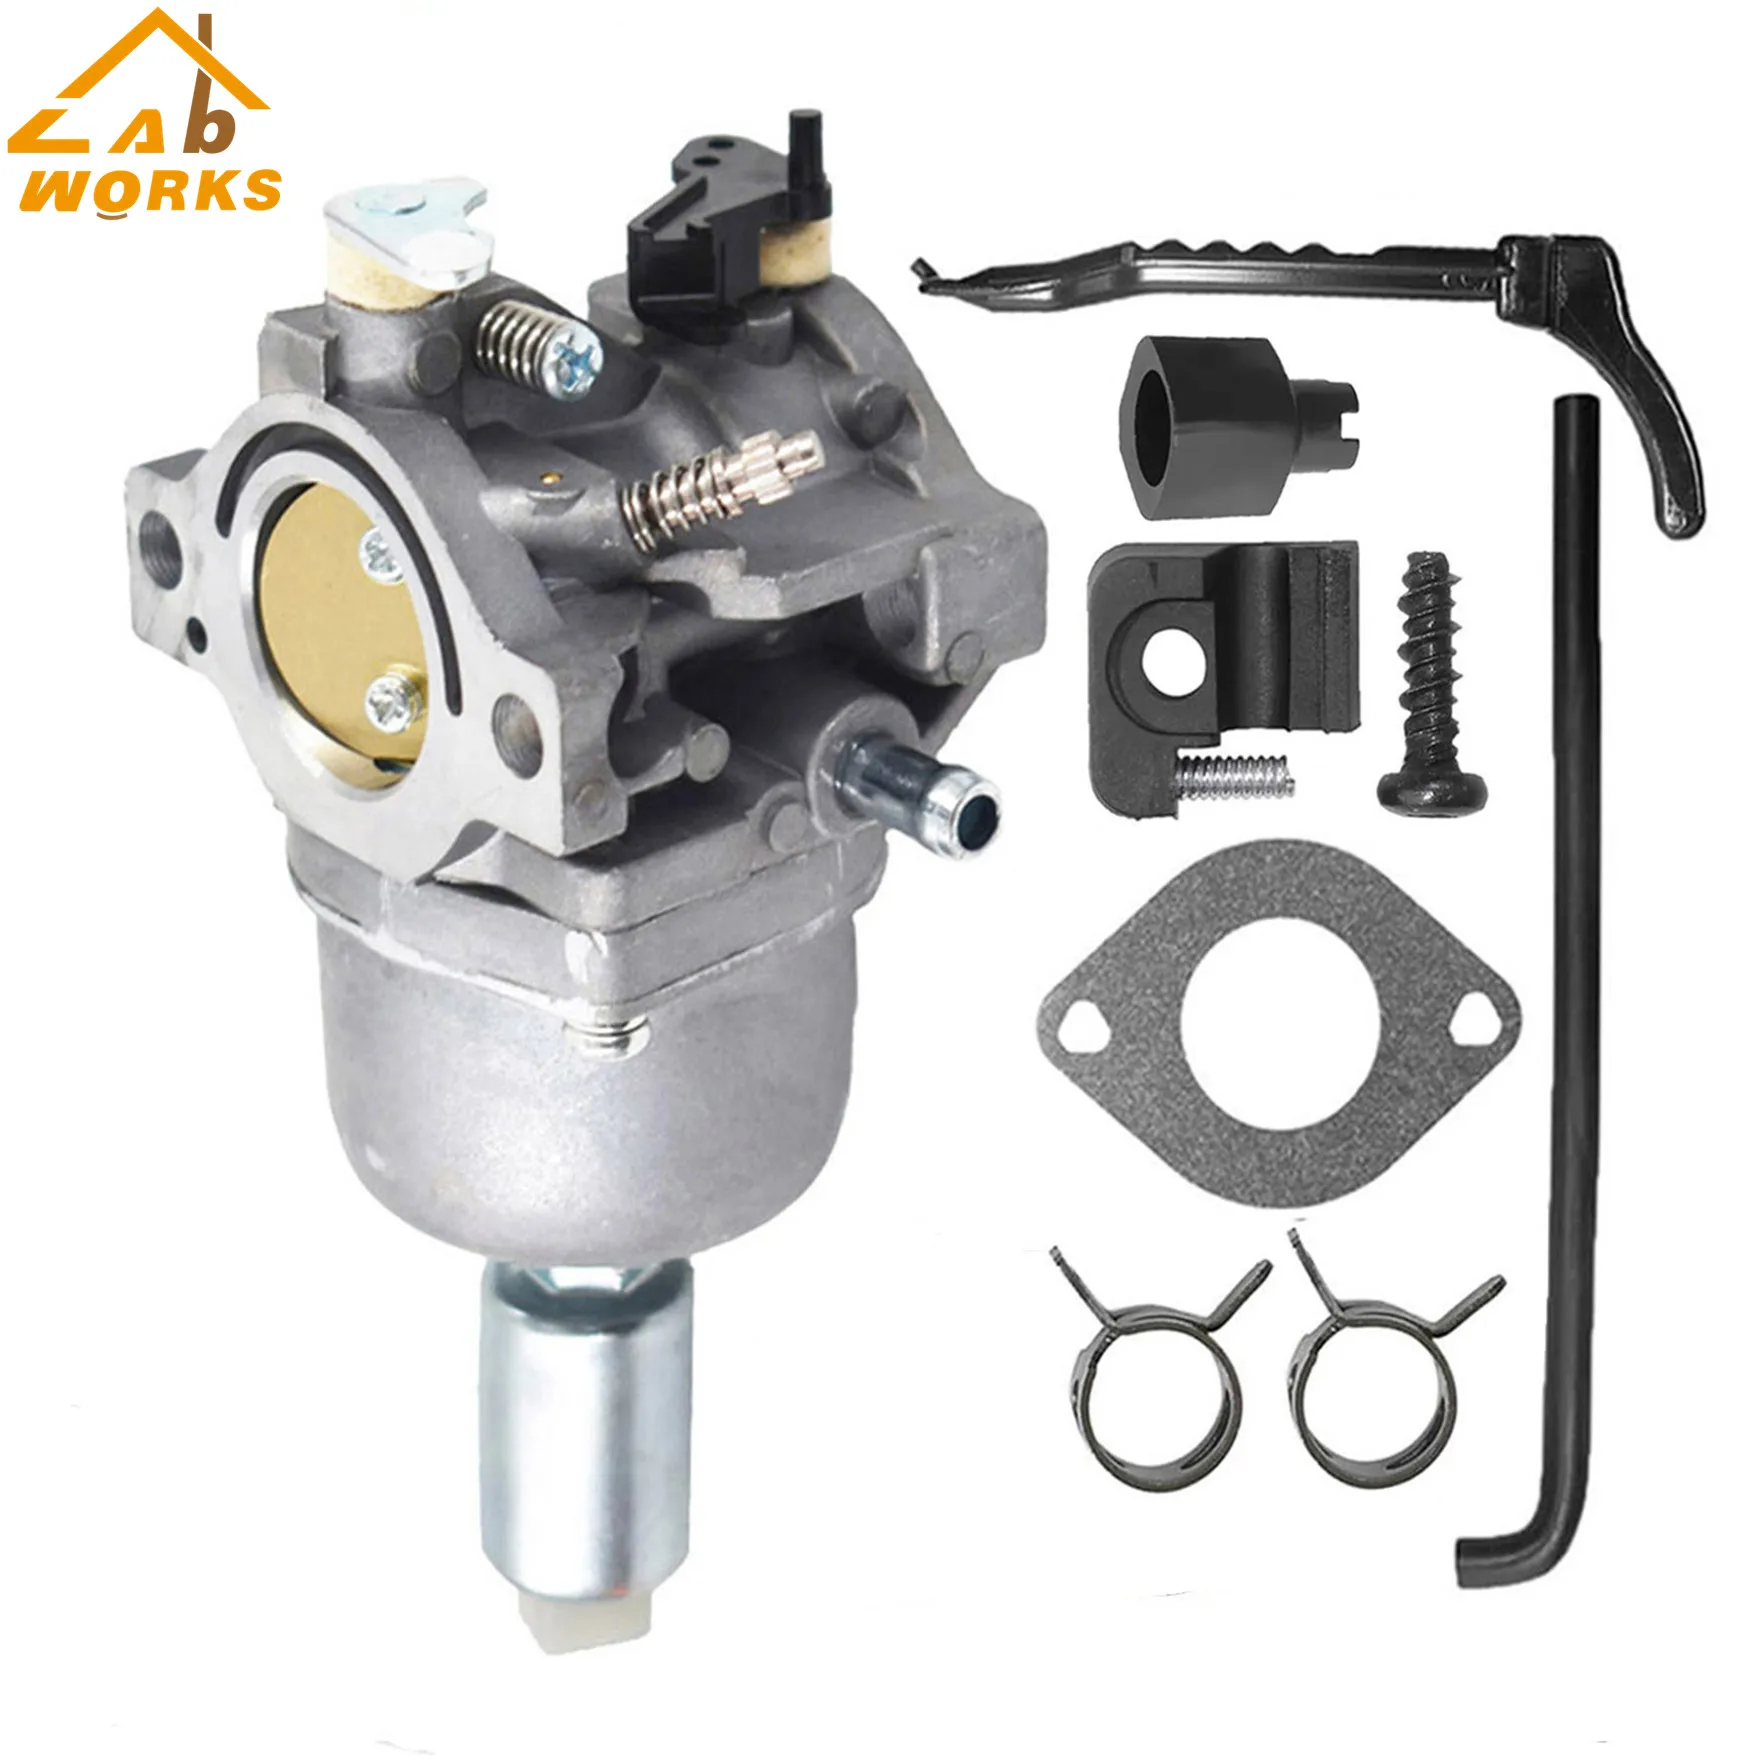 698620 699475 Lawn Mower Carburetor Fit For Briggs & Stratton 799727 With Gasket - $81.72